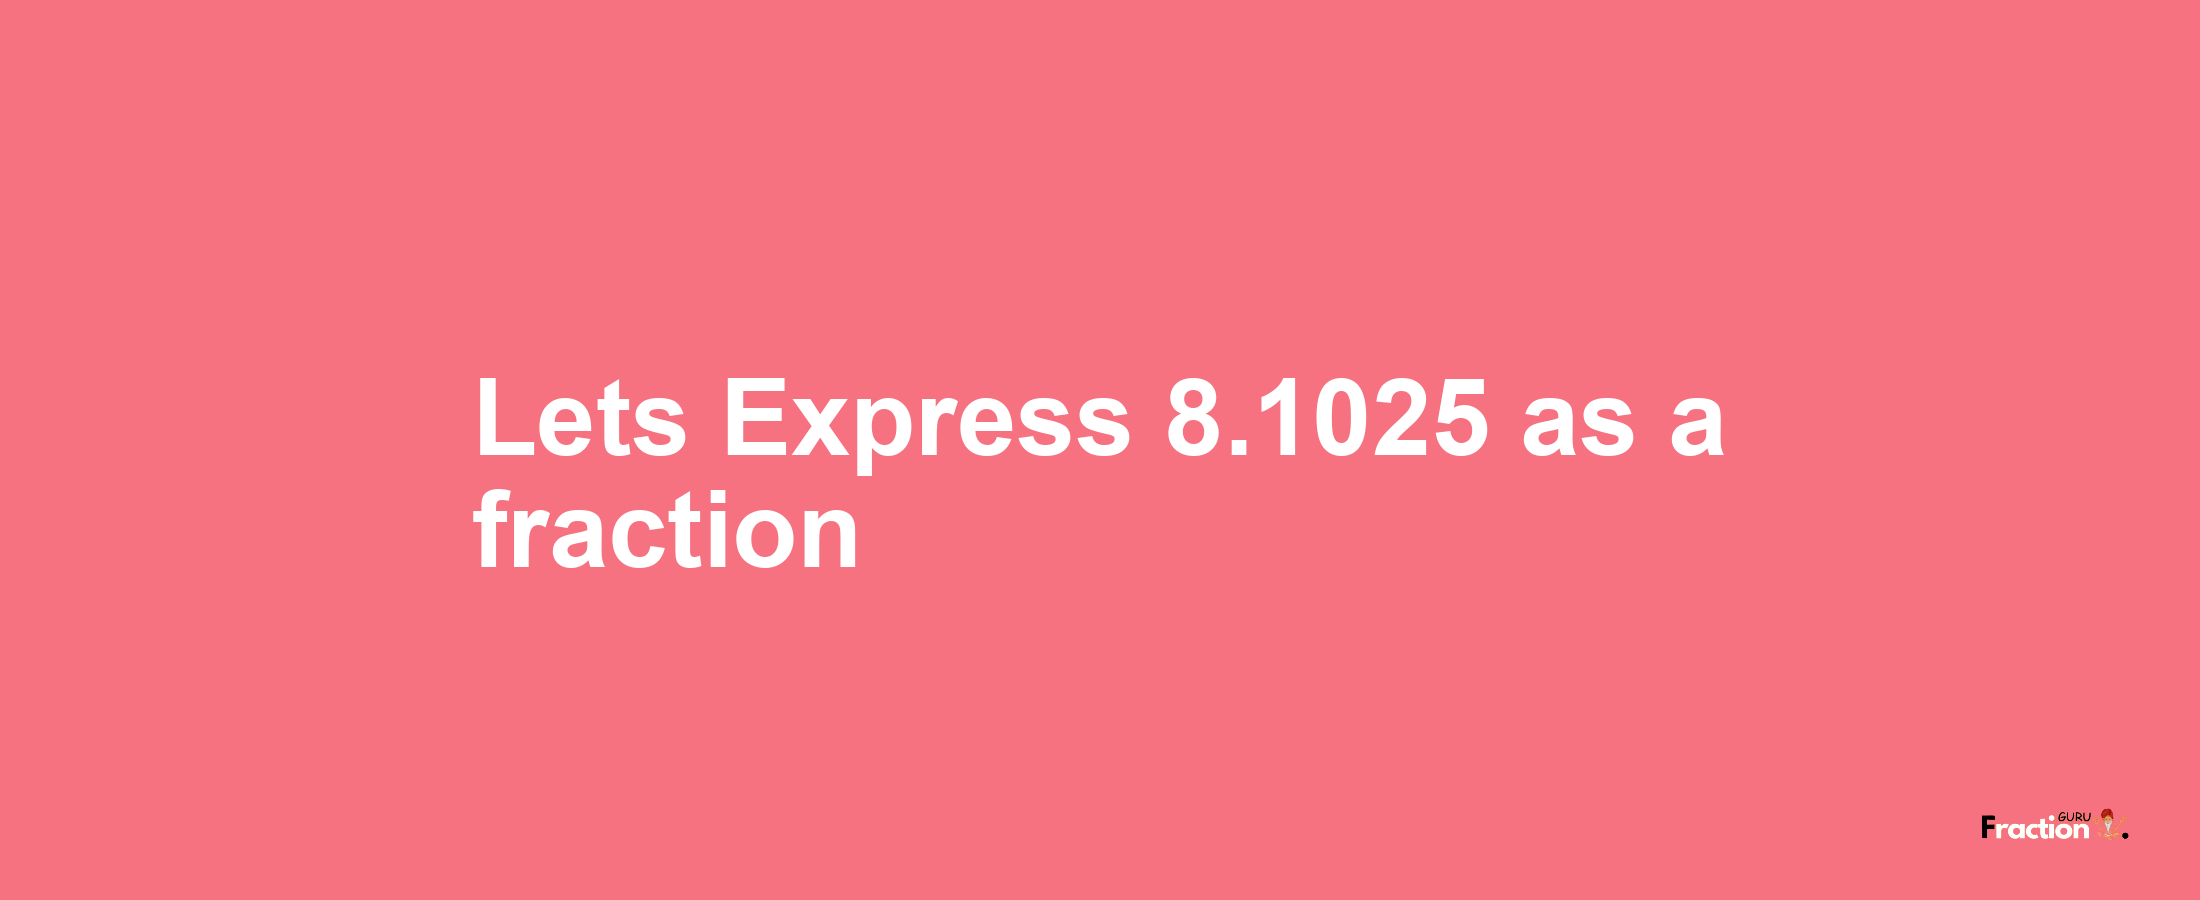 Lets Express 8.1025 as afraction